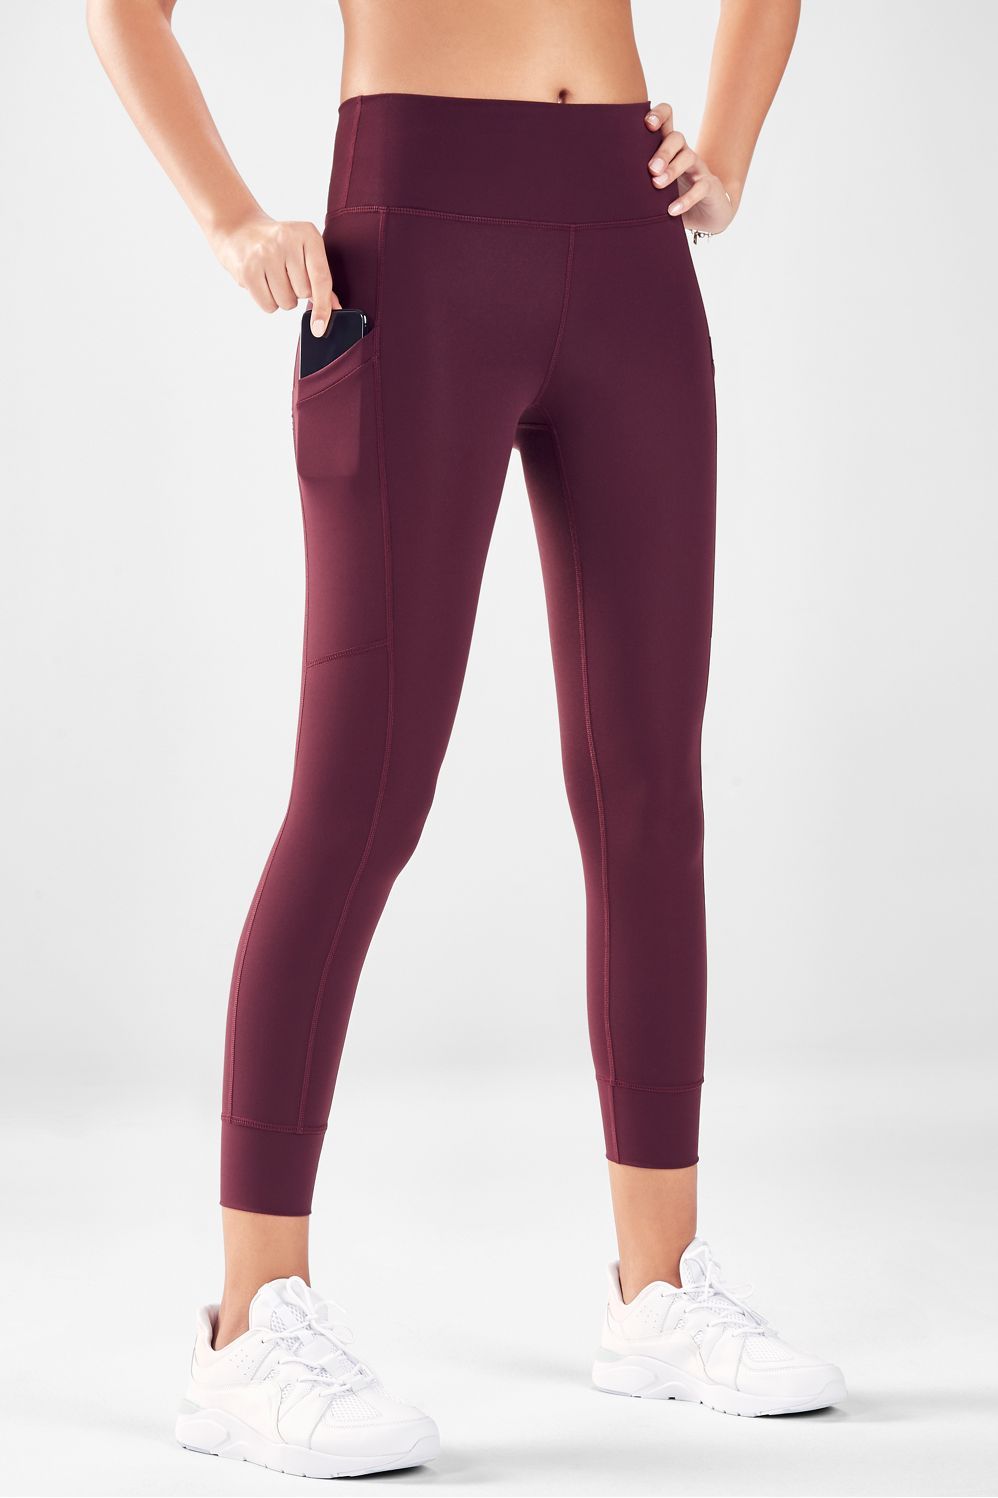 High-Waisted Statement Powerform 7/8 | Fabletics